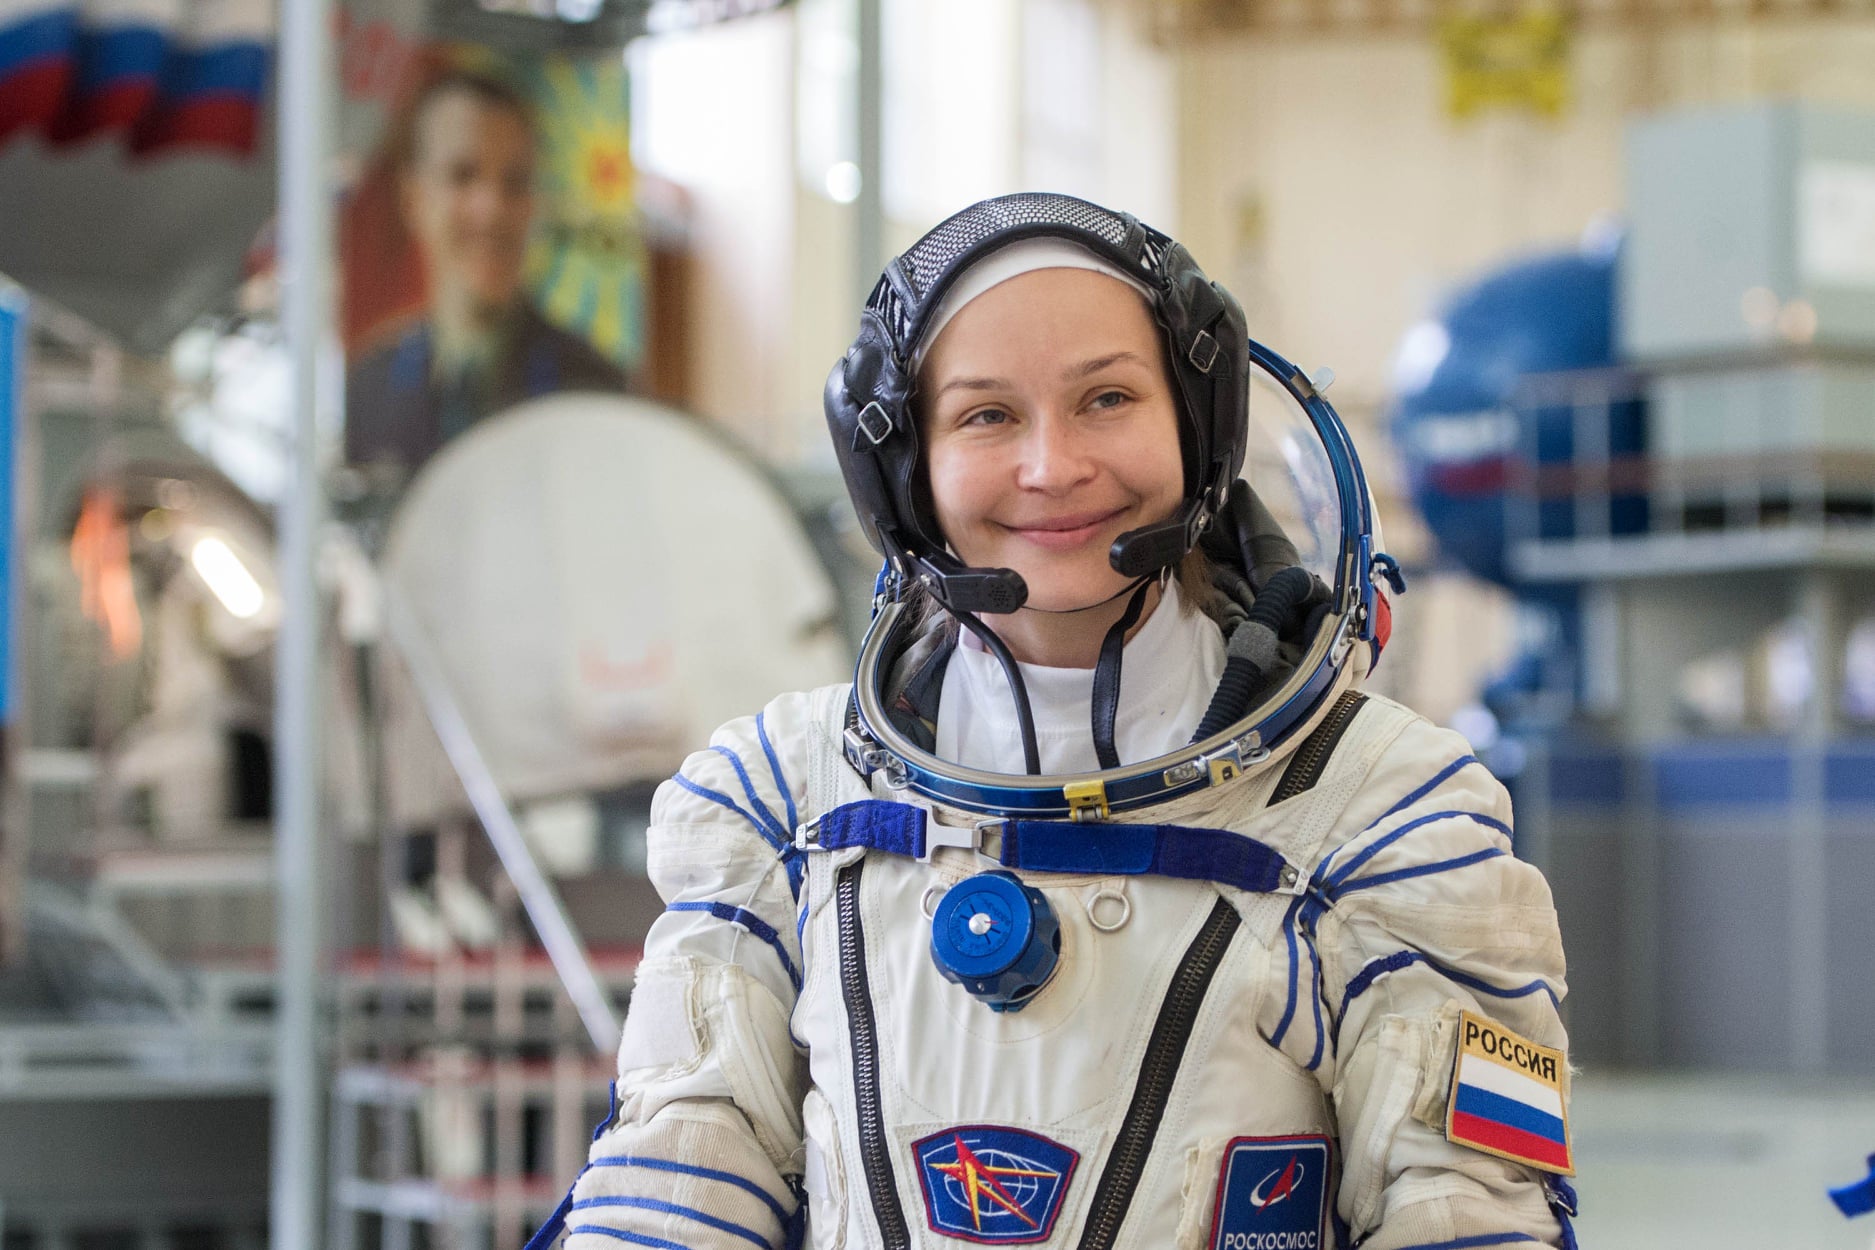 Yulia Peresild, who will portray Zhenya in the upcoming film, is currently preparing at the Yuri Gagarin Cosmonaut Training Centre. (Image: Roscosmos)